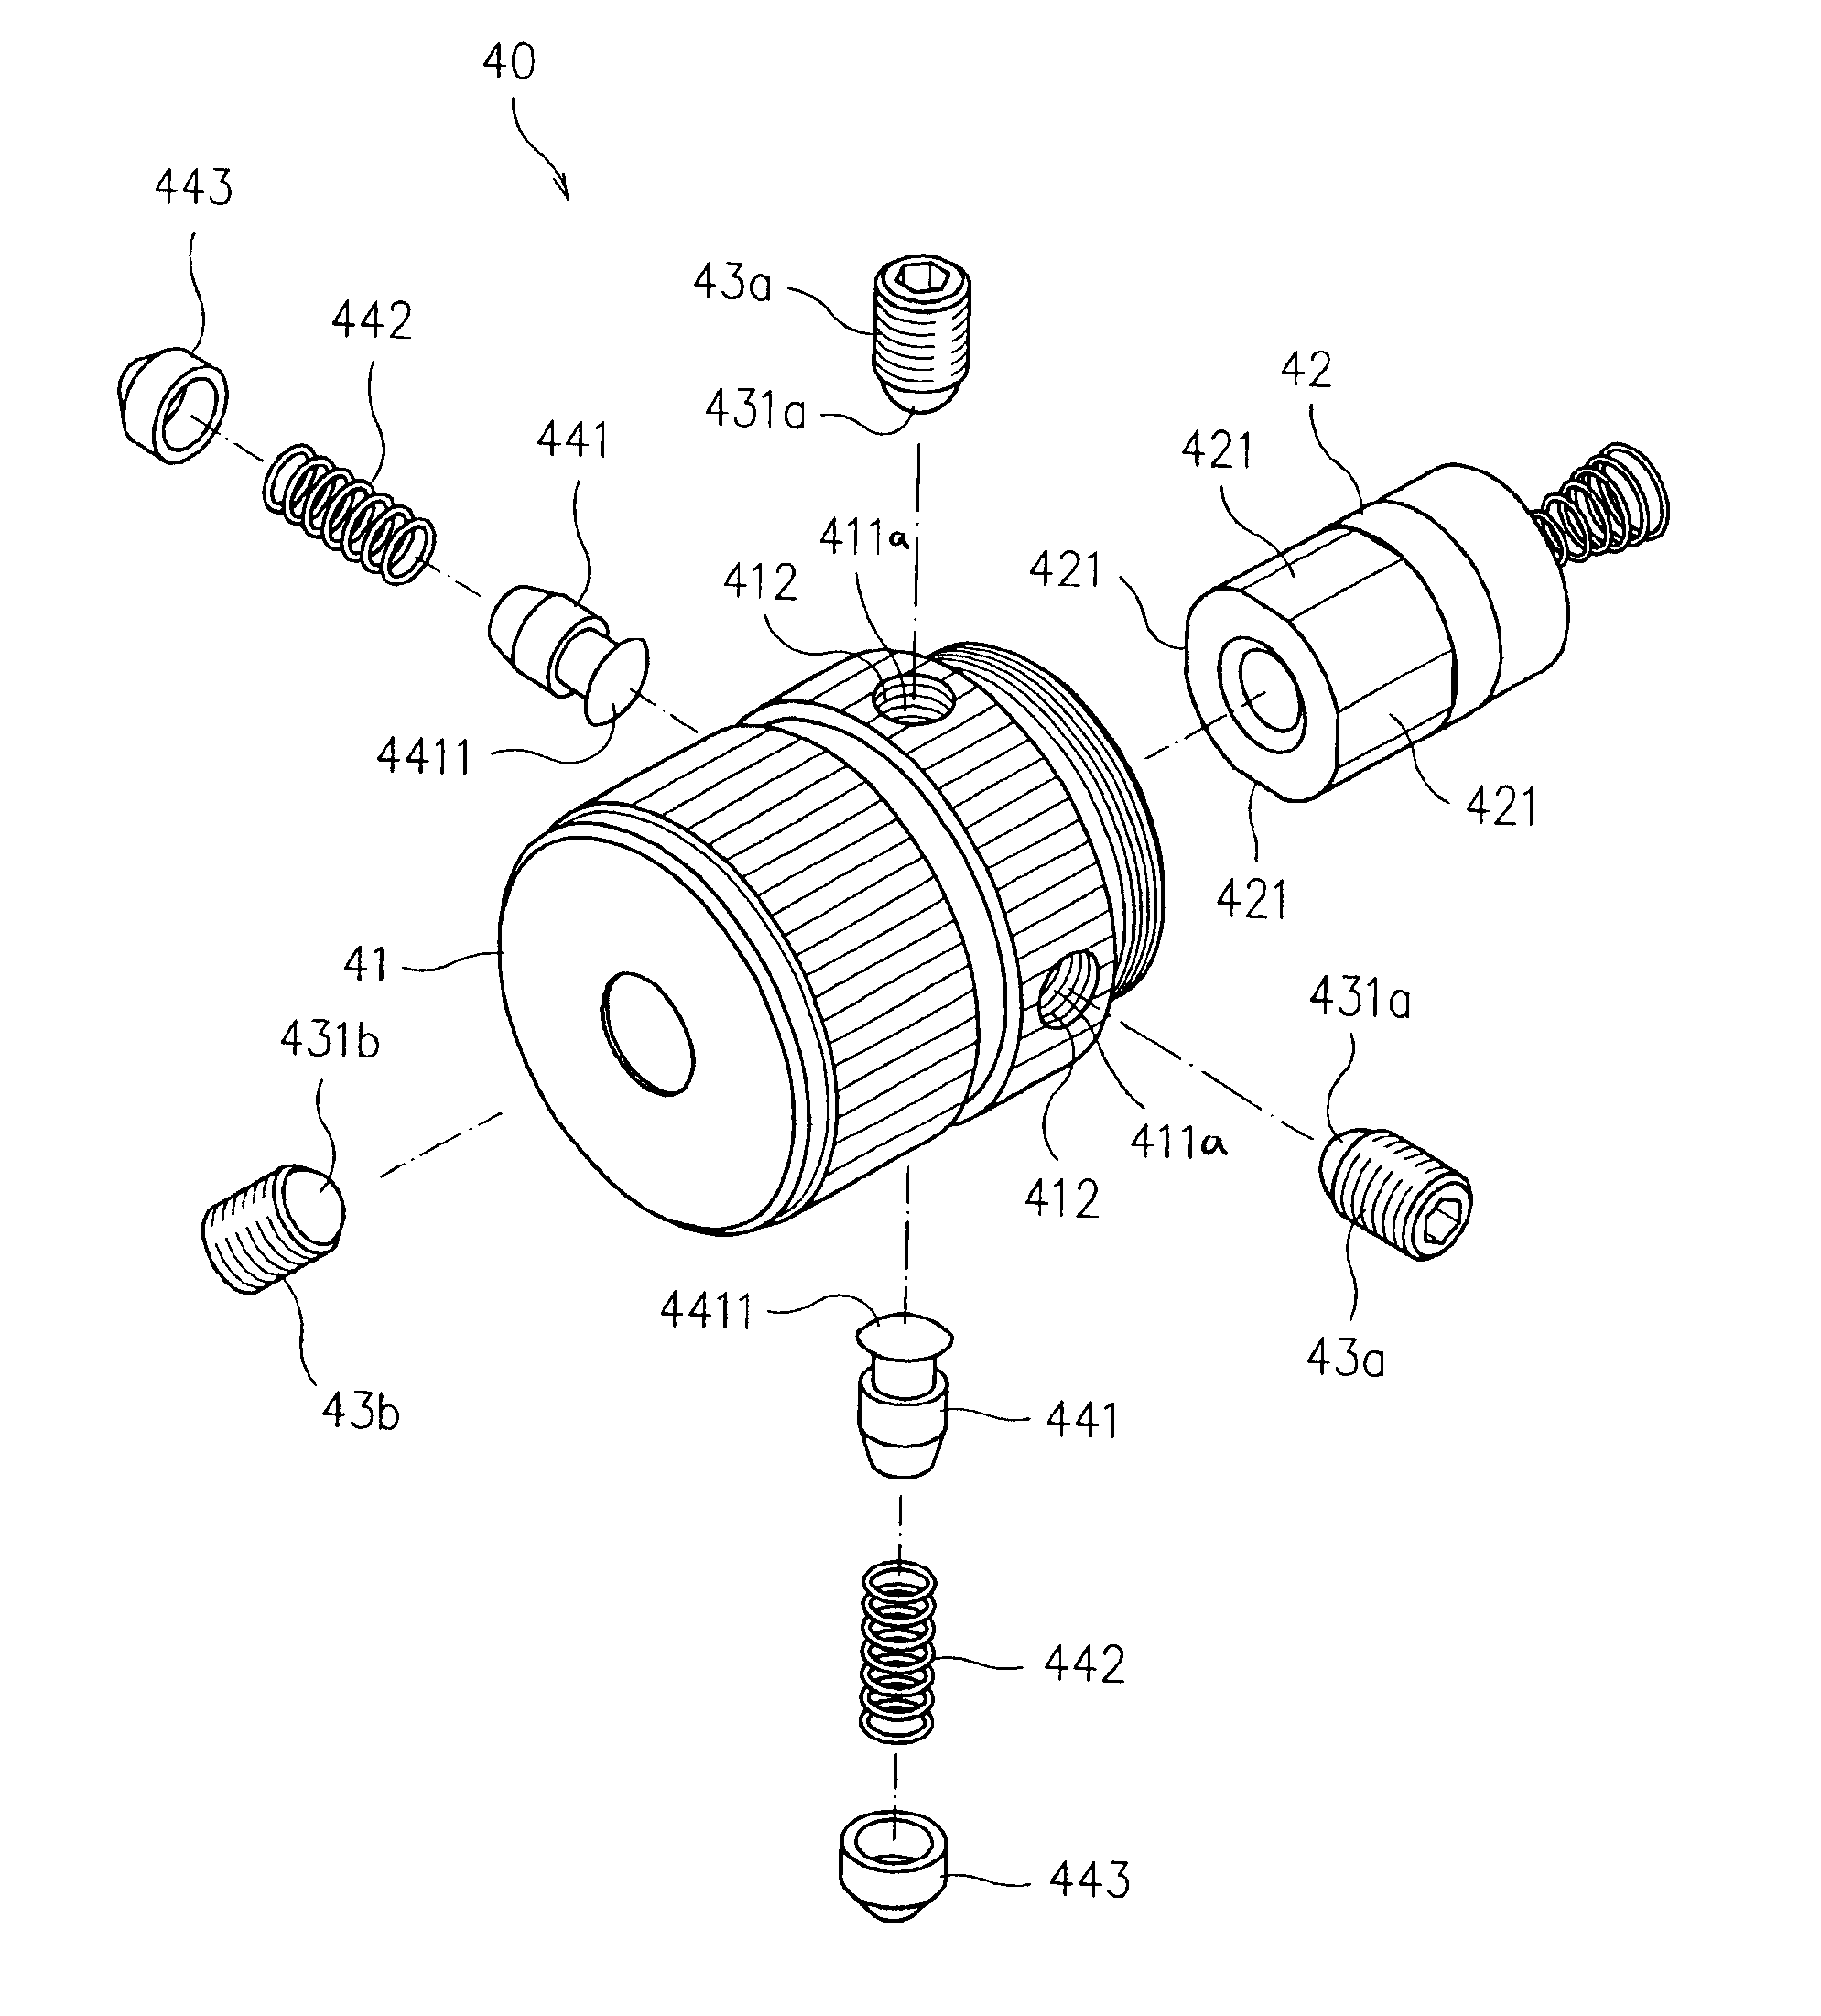 Position and adjustment device using laser module